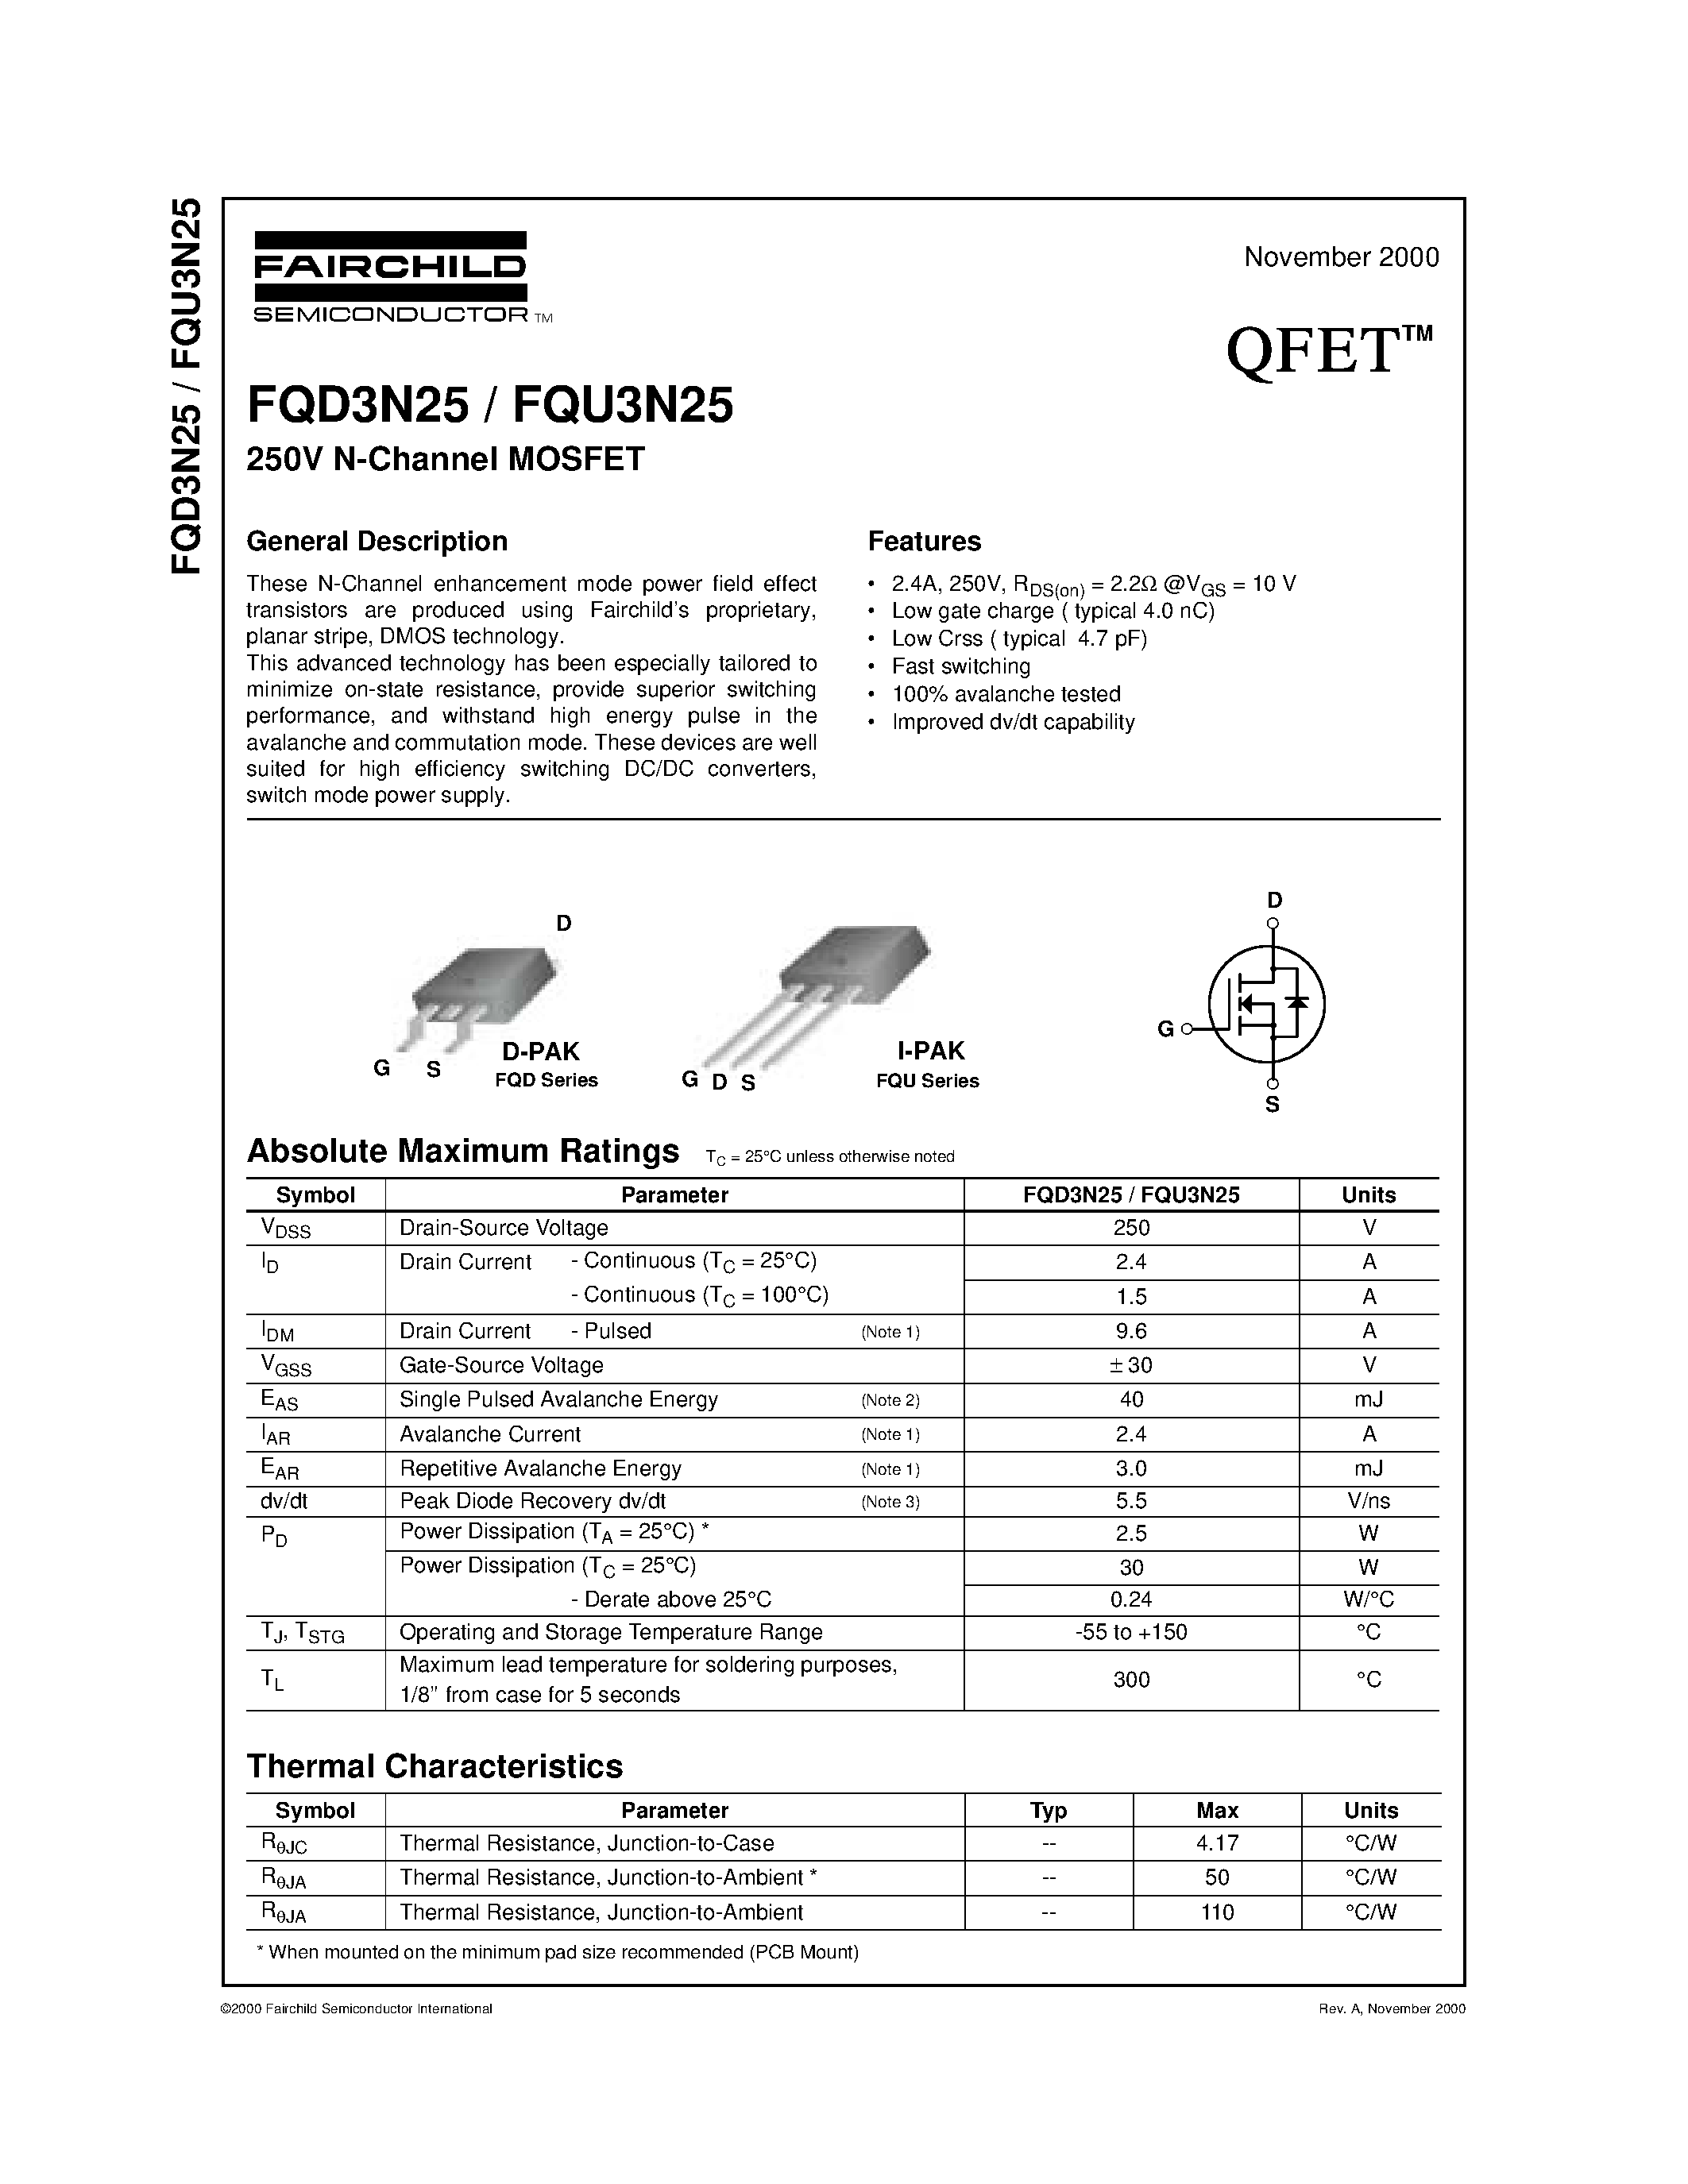 Datasheet FQD3N25 - 250V N-Channel MOSFET page 1